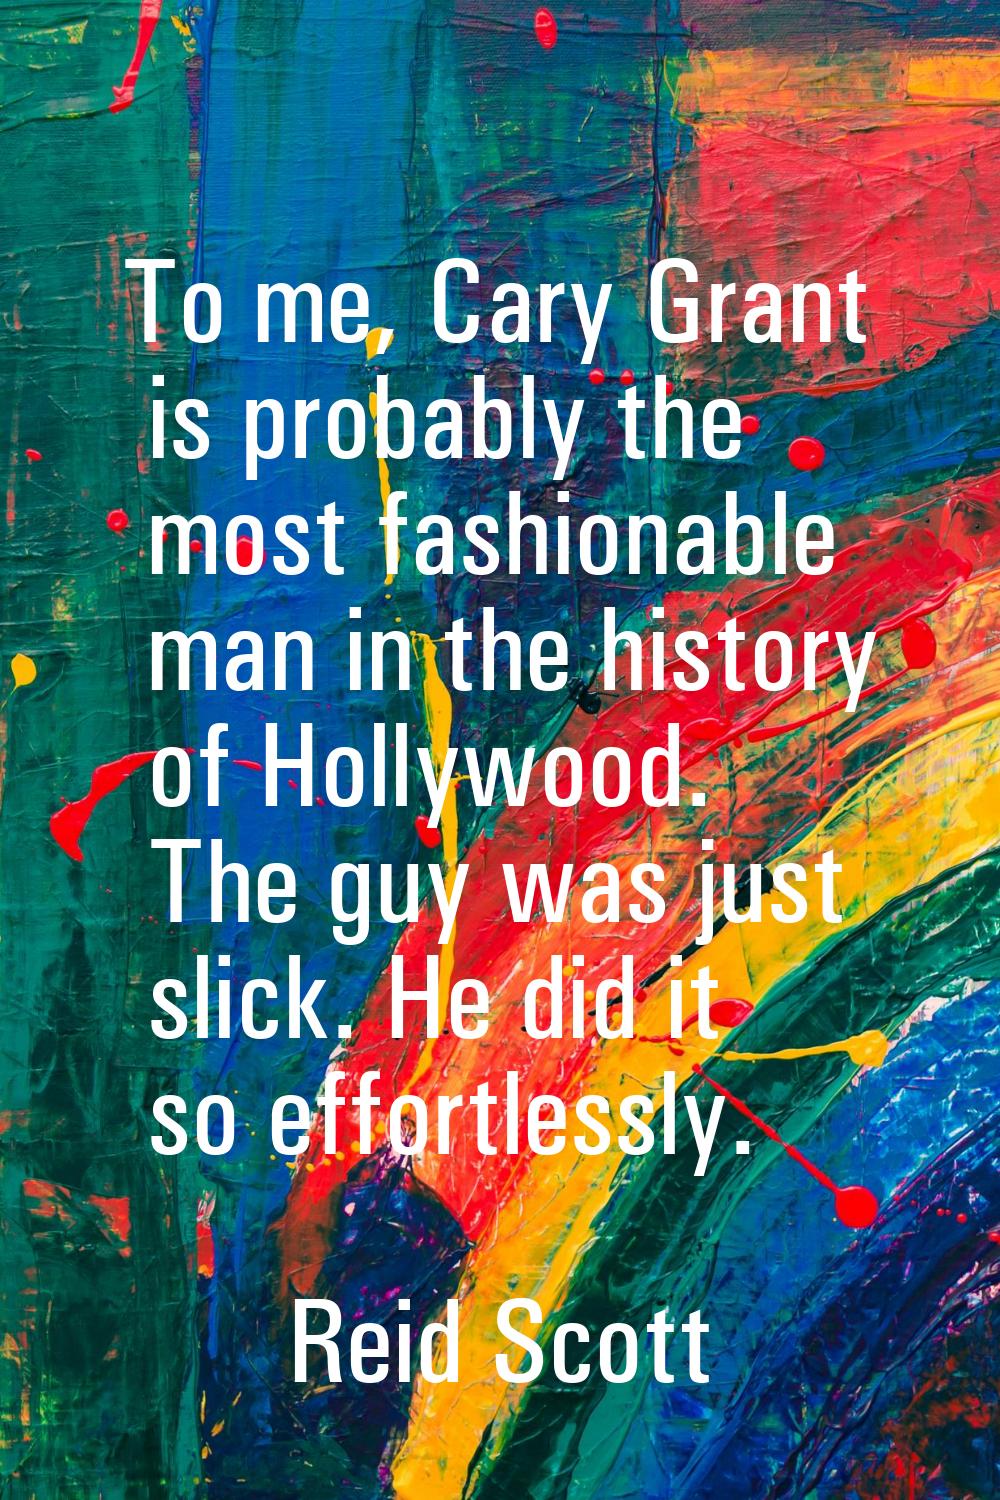 To me, Cary Grant is probably the most fashionable man in the history of Hollywood. The guy was jus